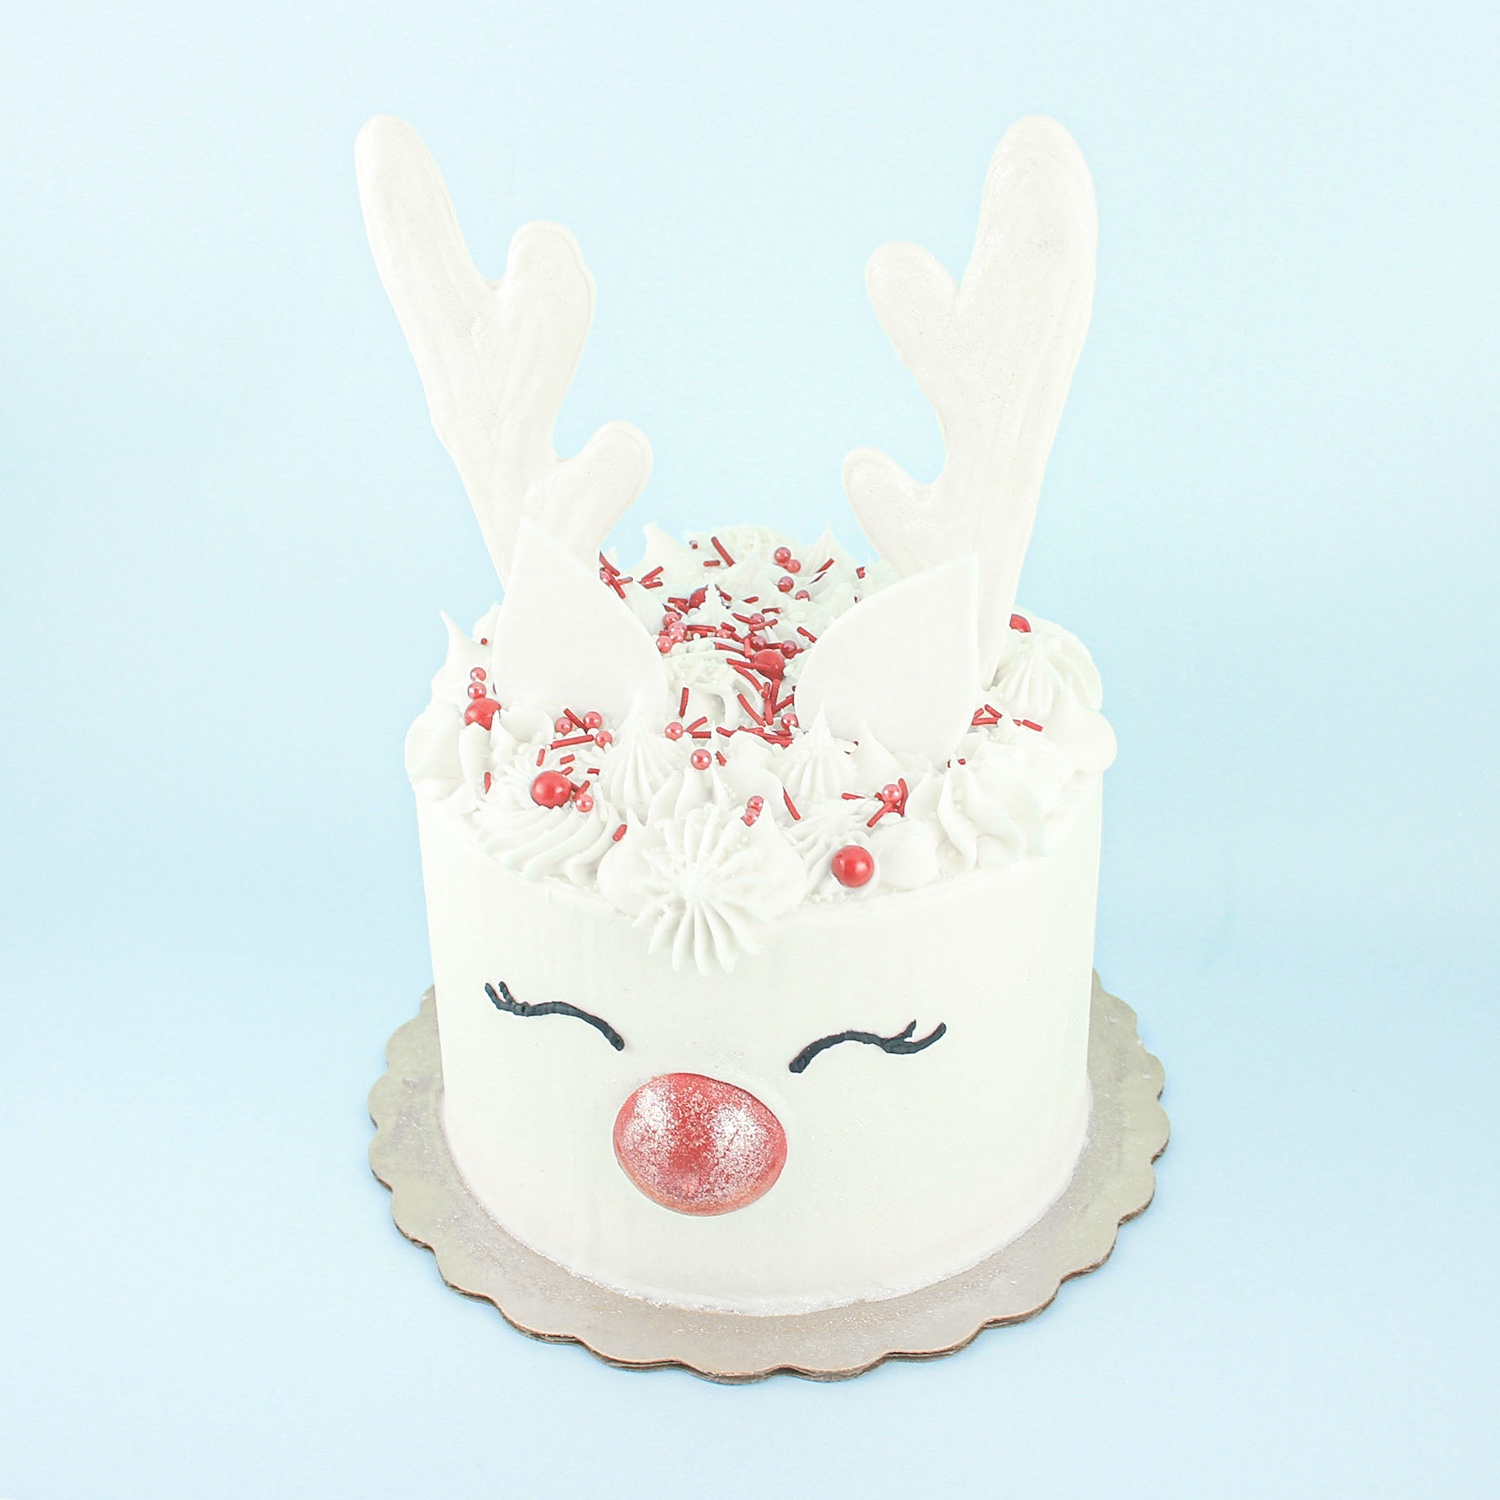 White Reindeer Cake with white buttercream swirls crown, chocolate red nose, white chocolate antlers and black buttercream eyelashes